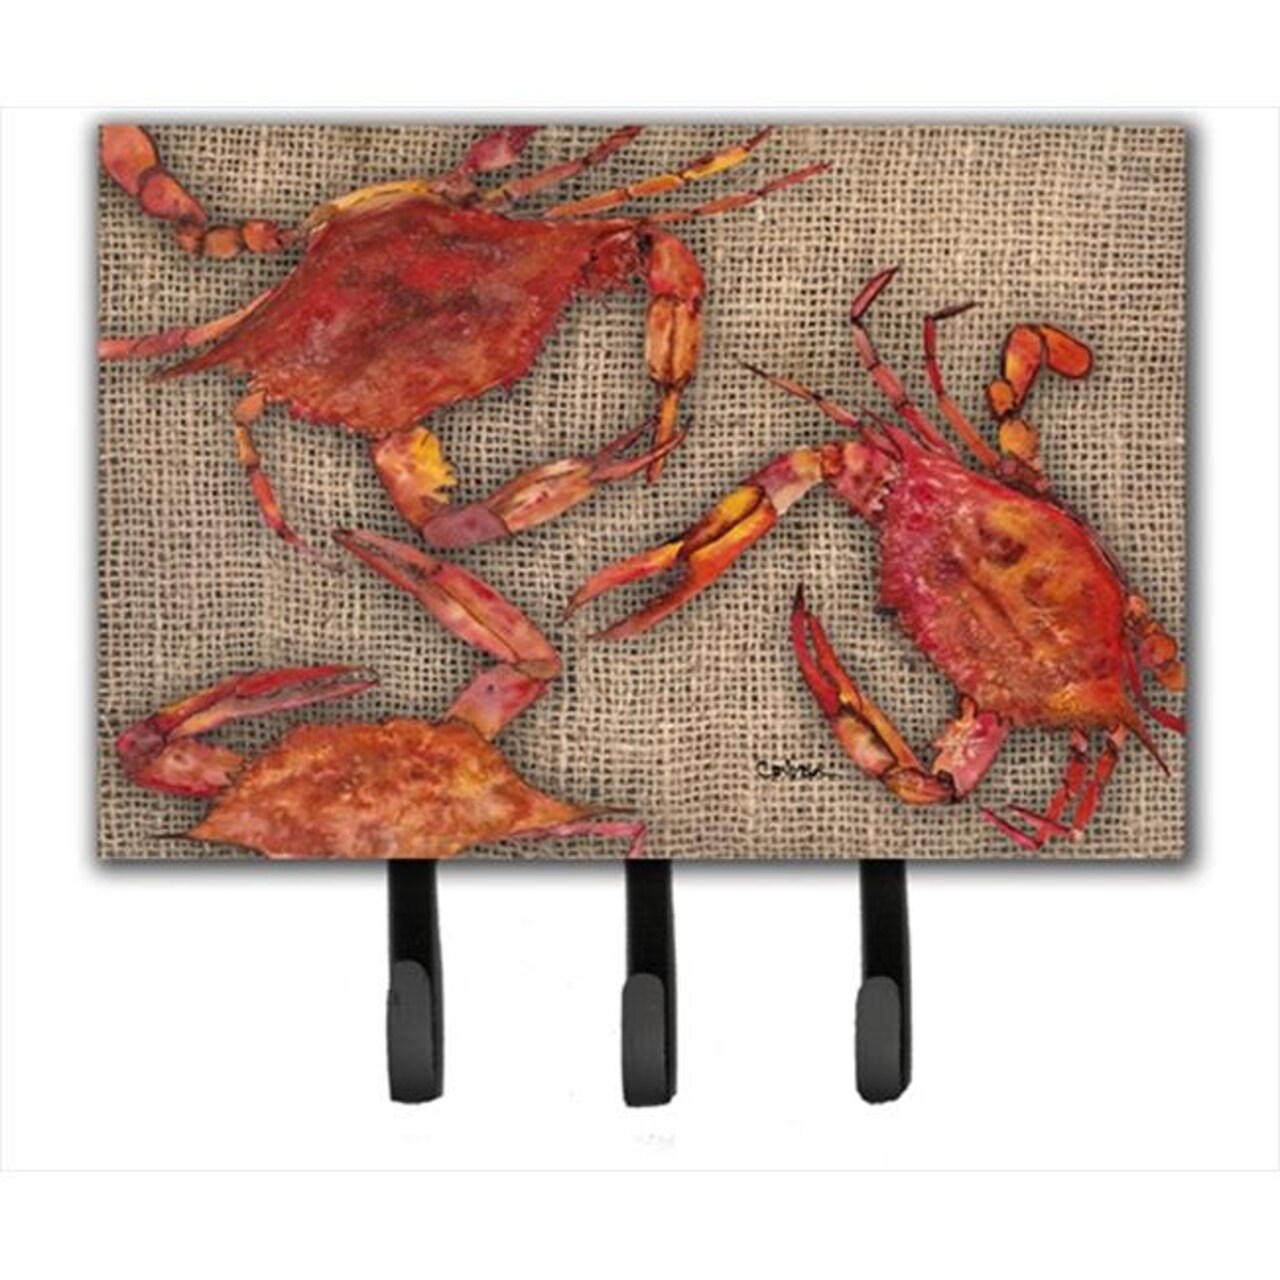 Carolines Treasures 8742TH68 6 x 9 in. Cooked Crabs on Faux Burlap Leash or Key Holder